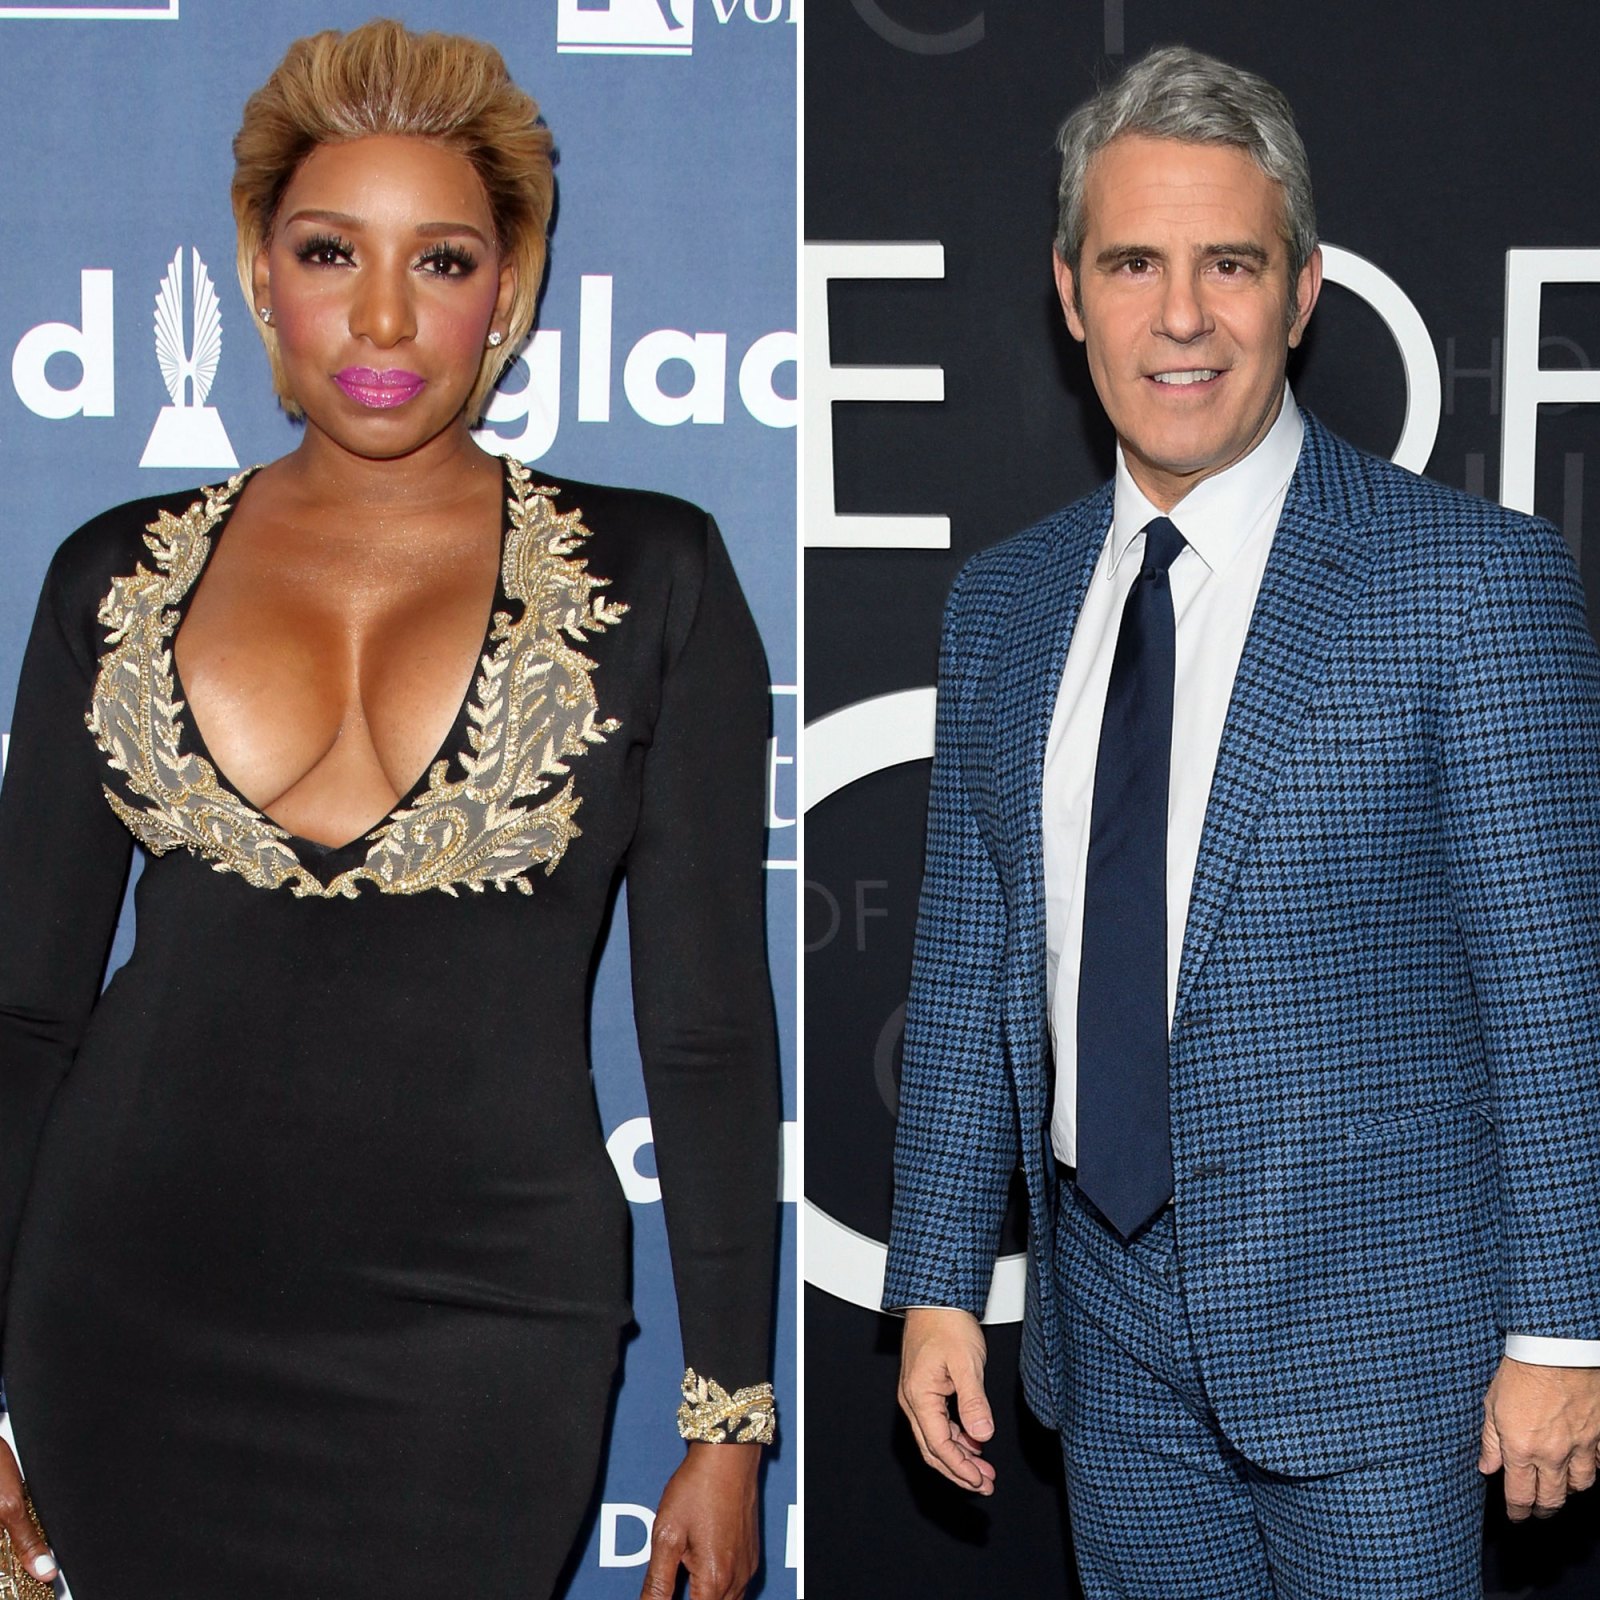 NeNe Leakes Sues Bravo and Andy Cohen Over Alleged Racist and Hostile Work Environment